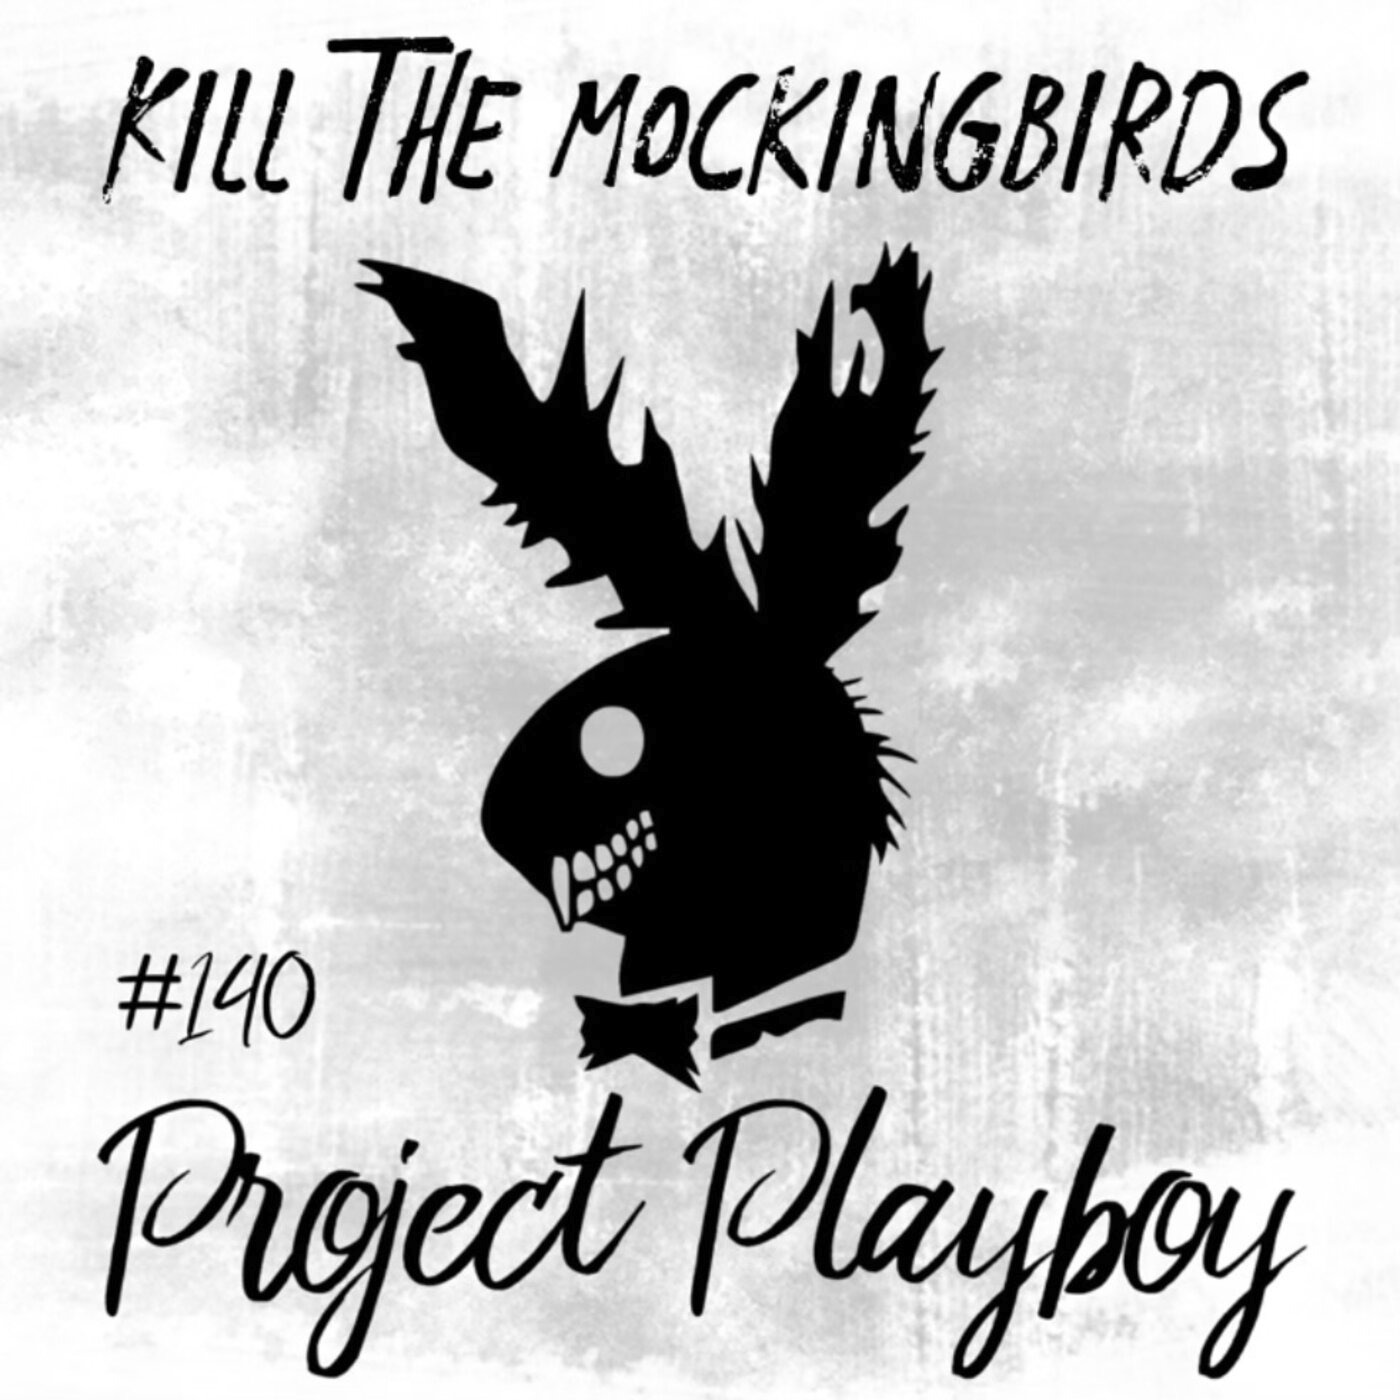 #140 “PROJECT PLAYBOY”